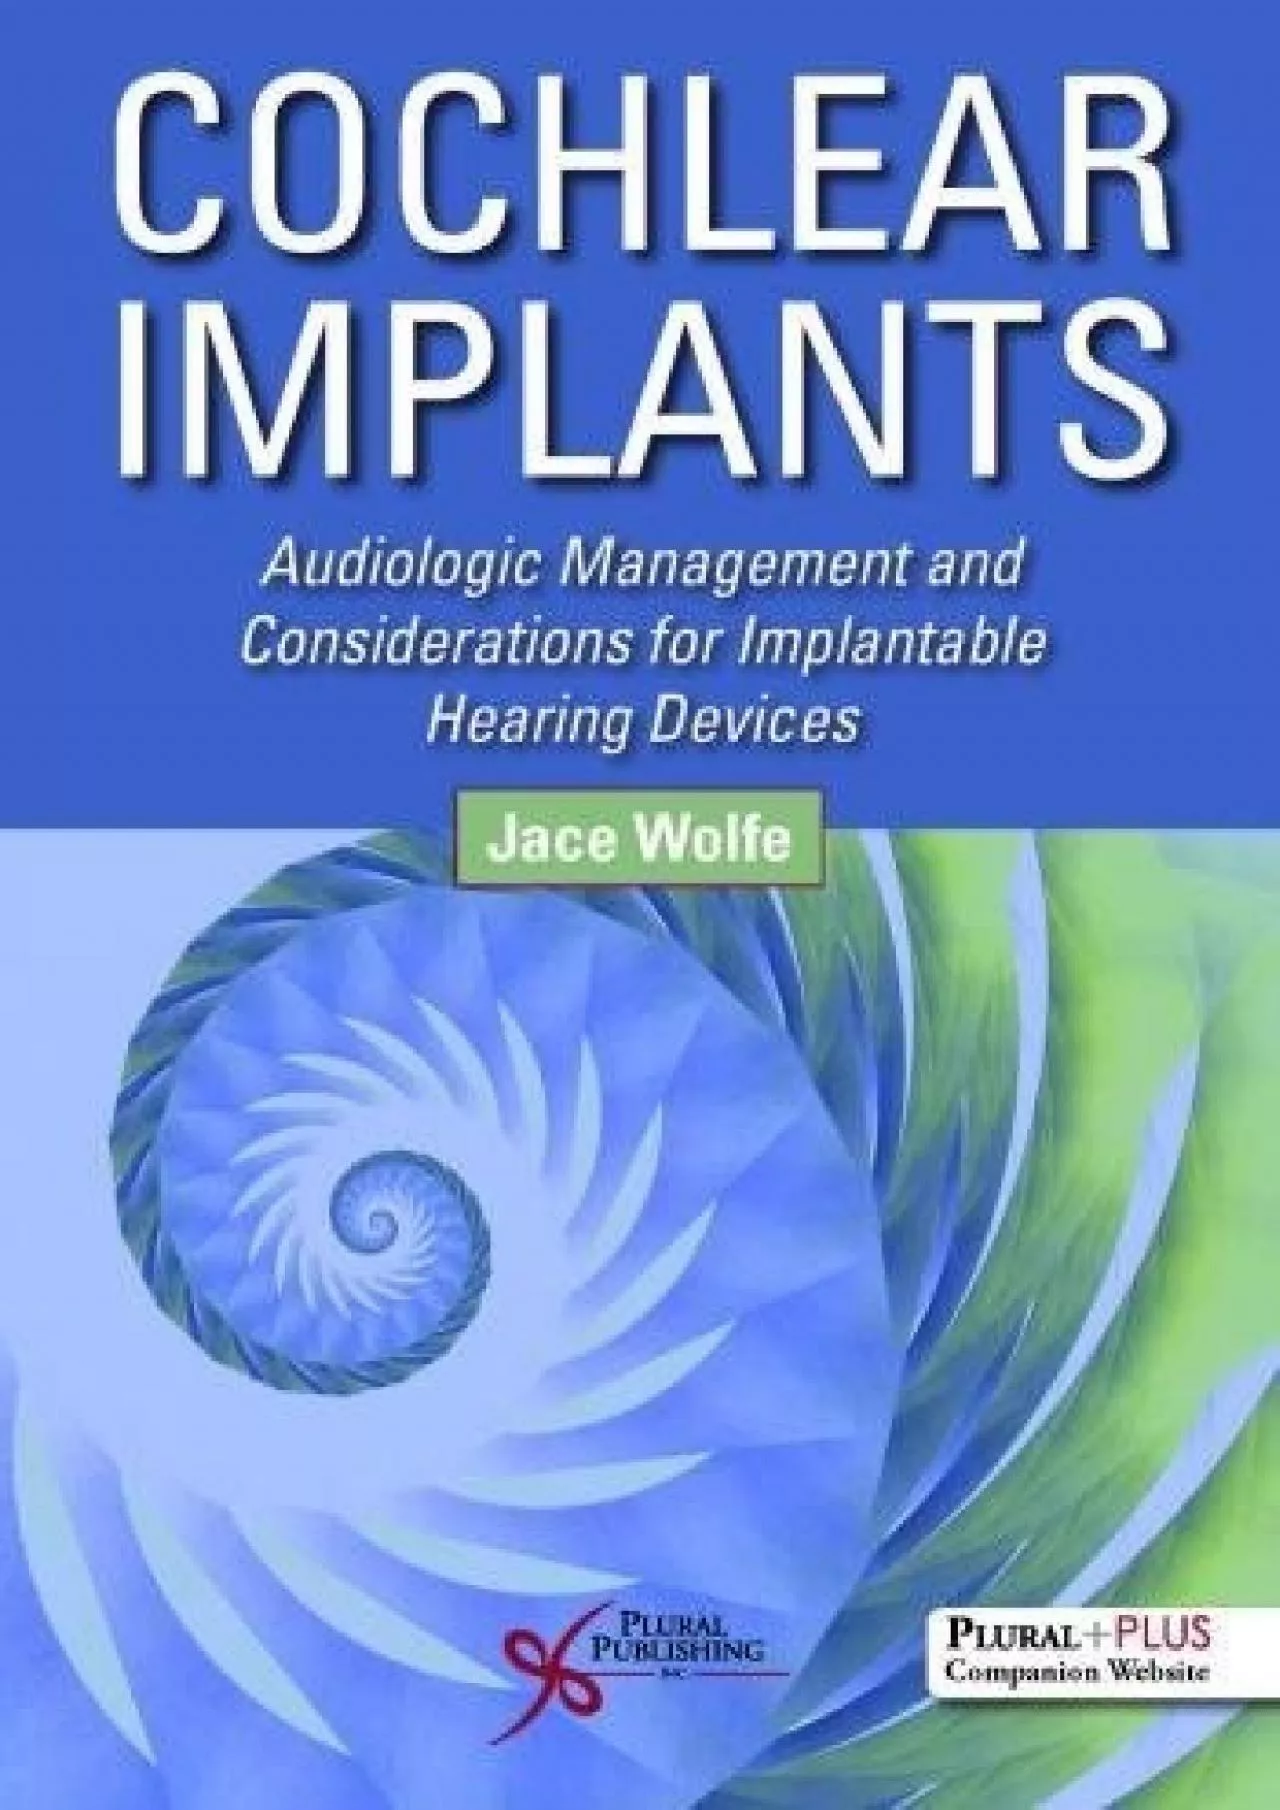 (BOOK)-Cochlear Implants: Audiologic Management and Considerations for Implantable Hearing